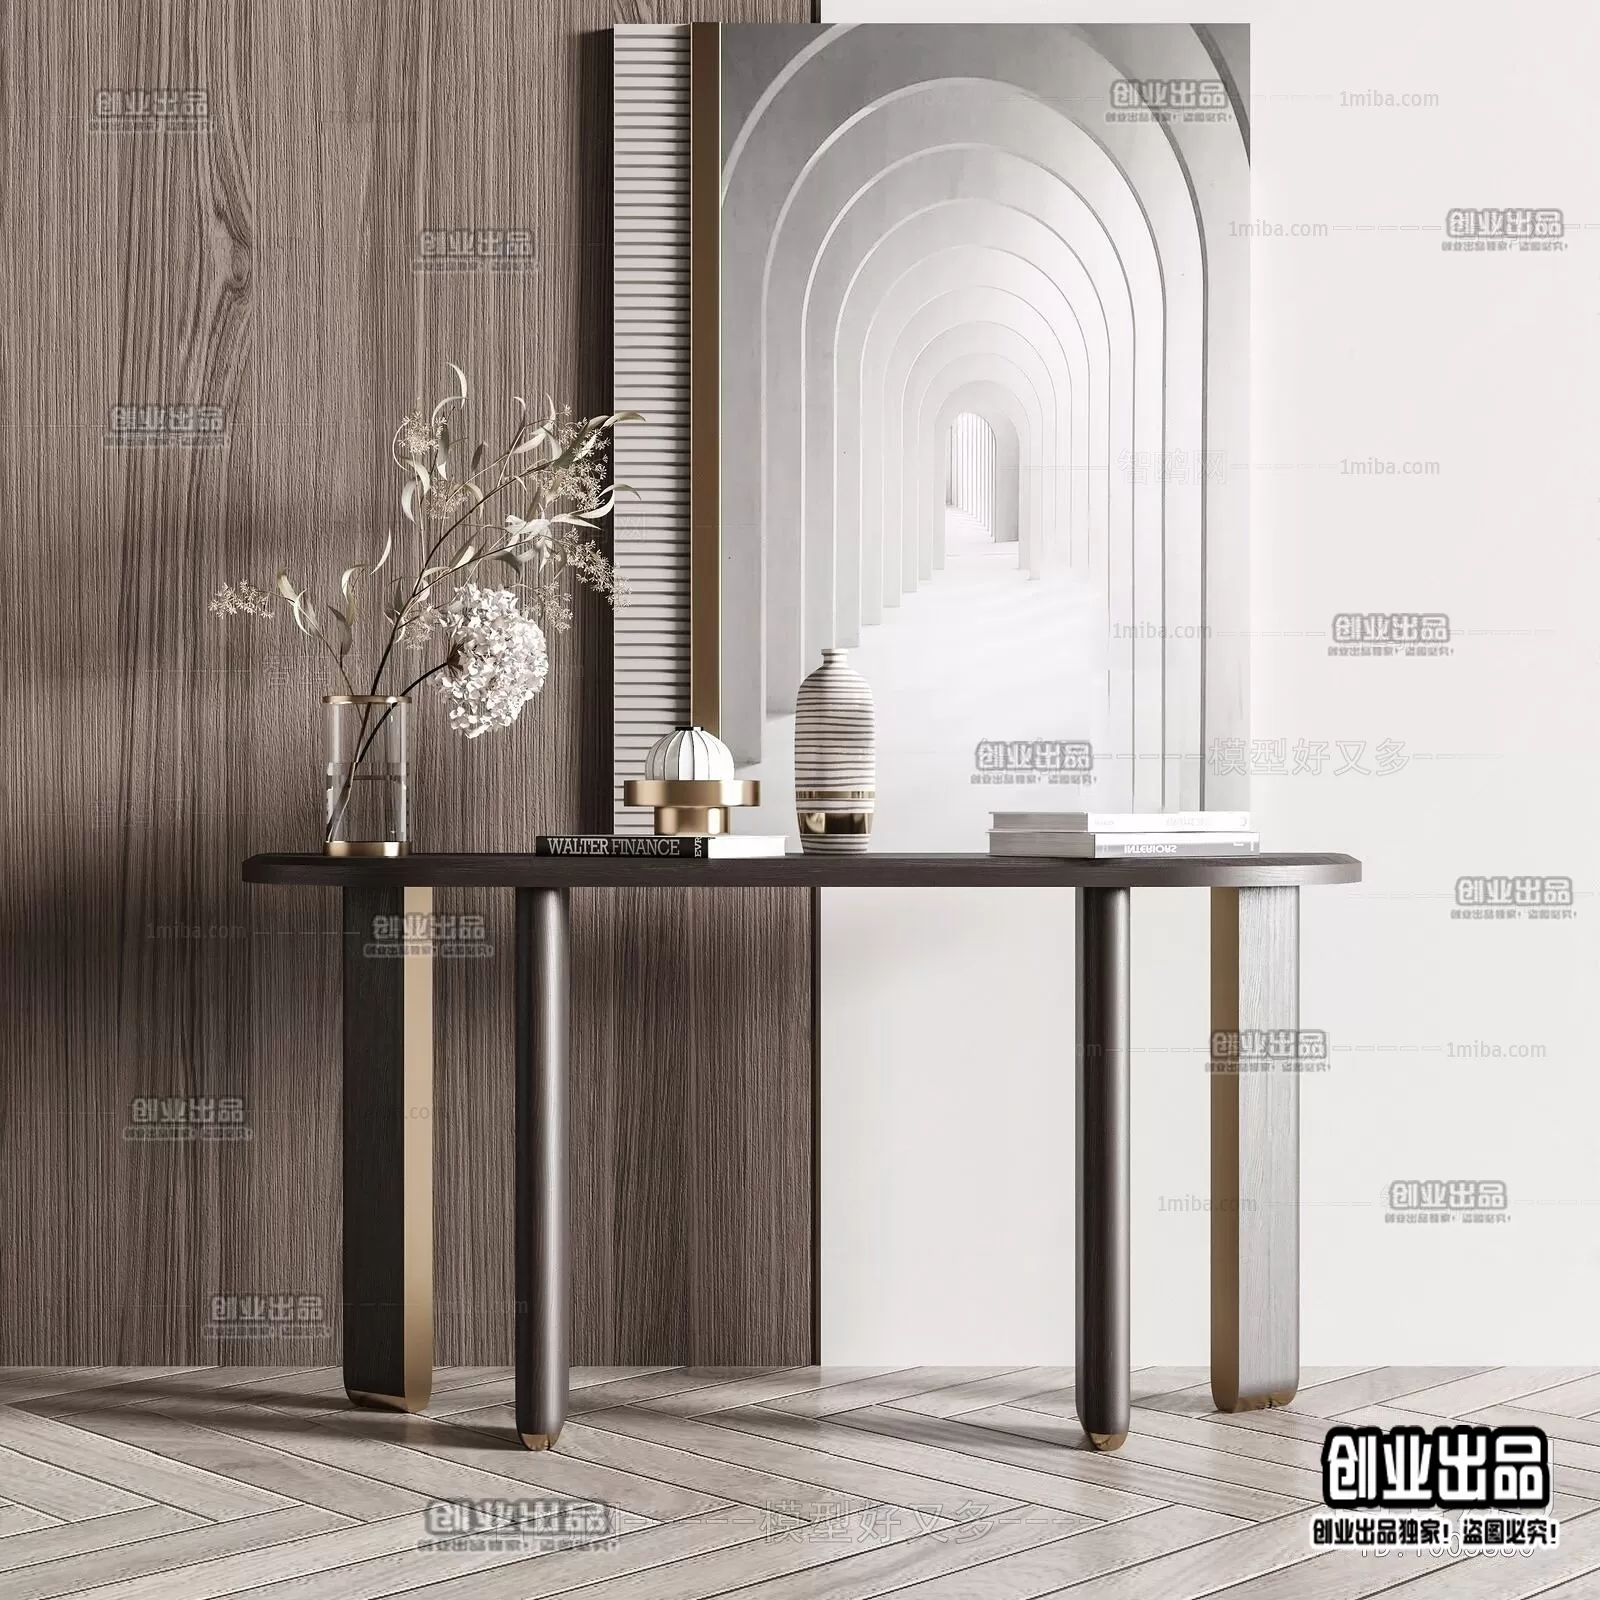 CONSOLE TABLE – 27 – FURNITURE 3D MODELS 2022 (VRAY)